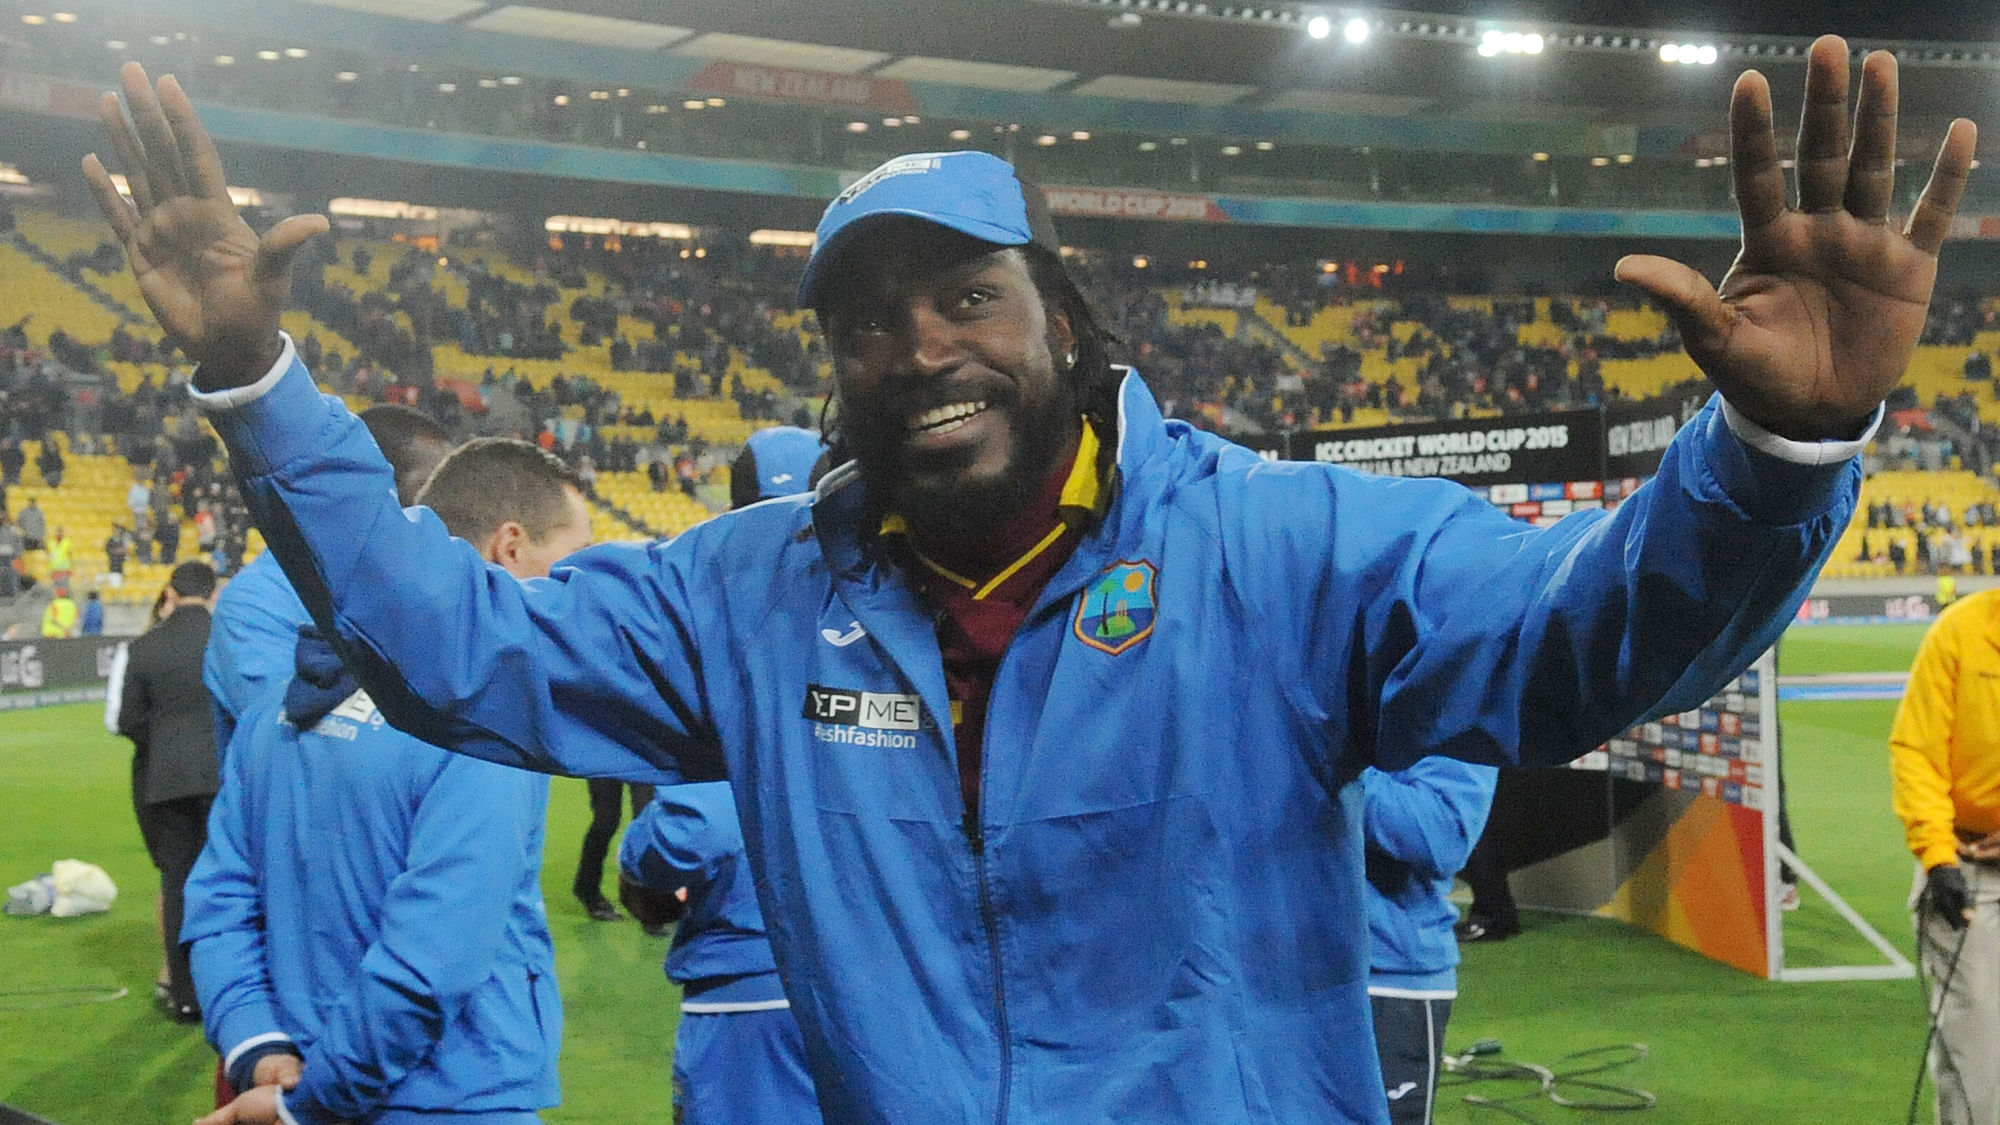 Chris Gayle has been included in West Indies’ 15-man squad for the 2019 ICC World Cup.